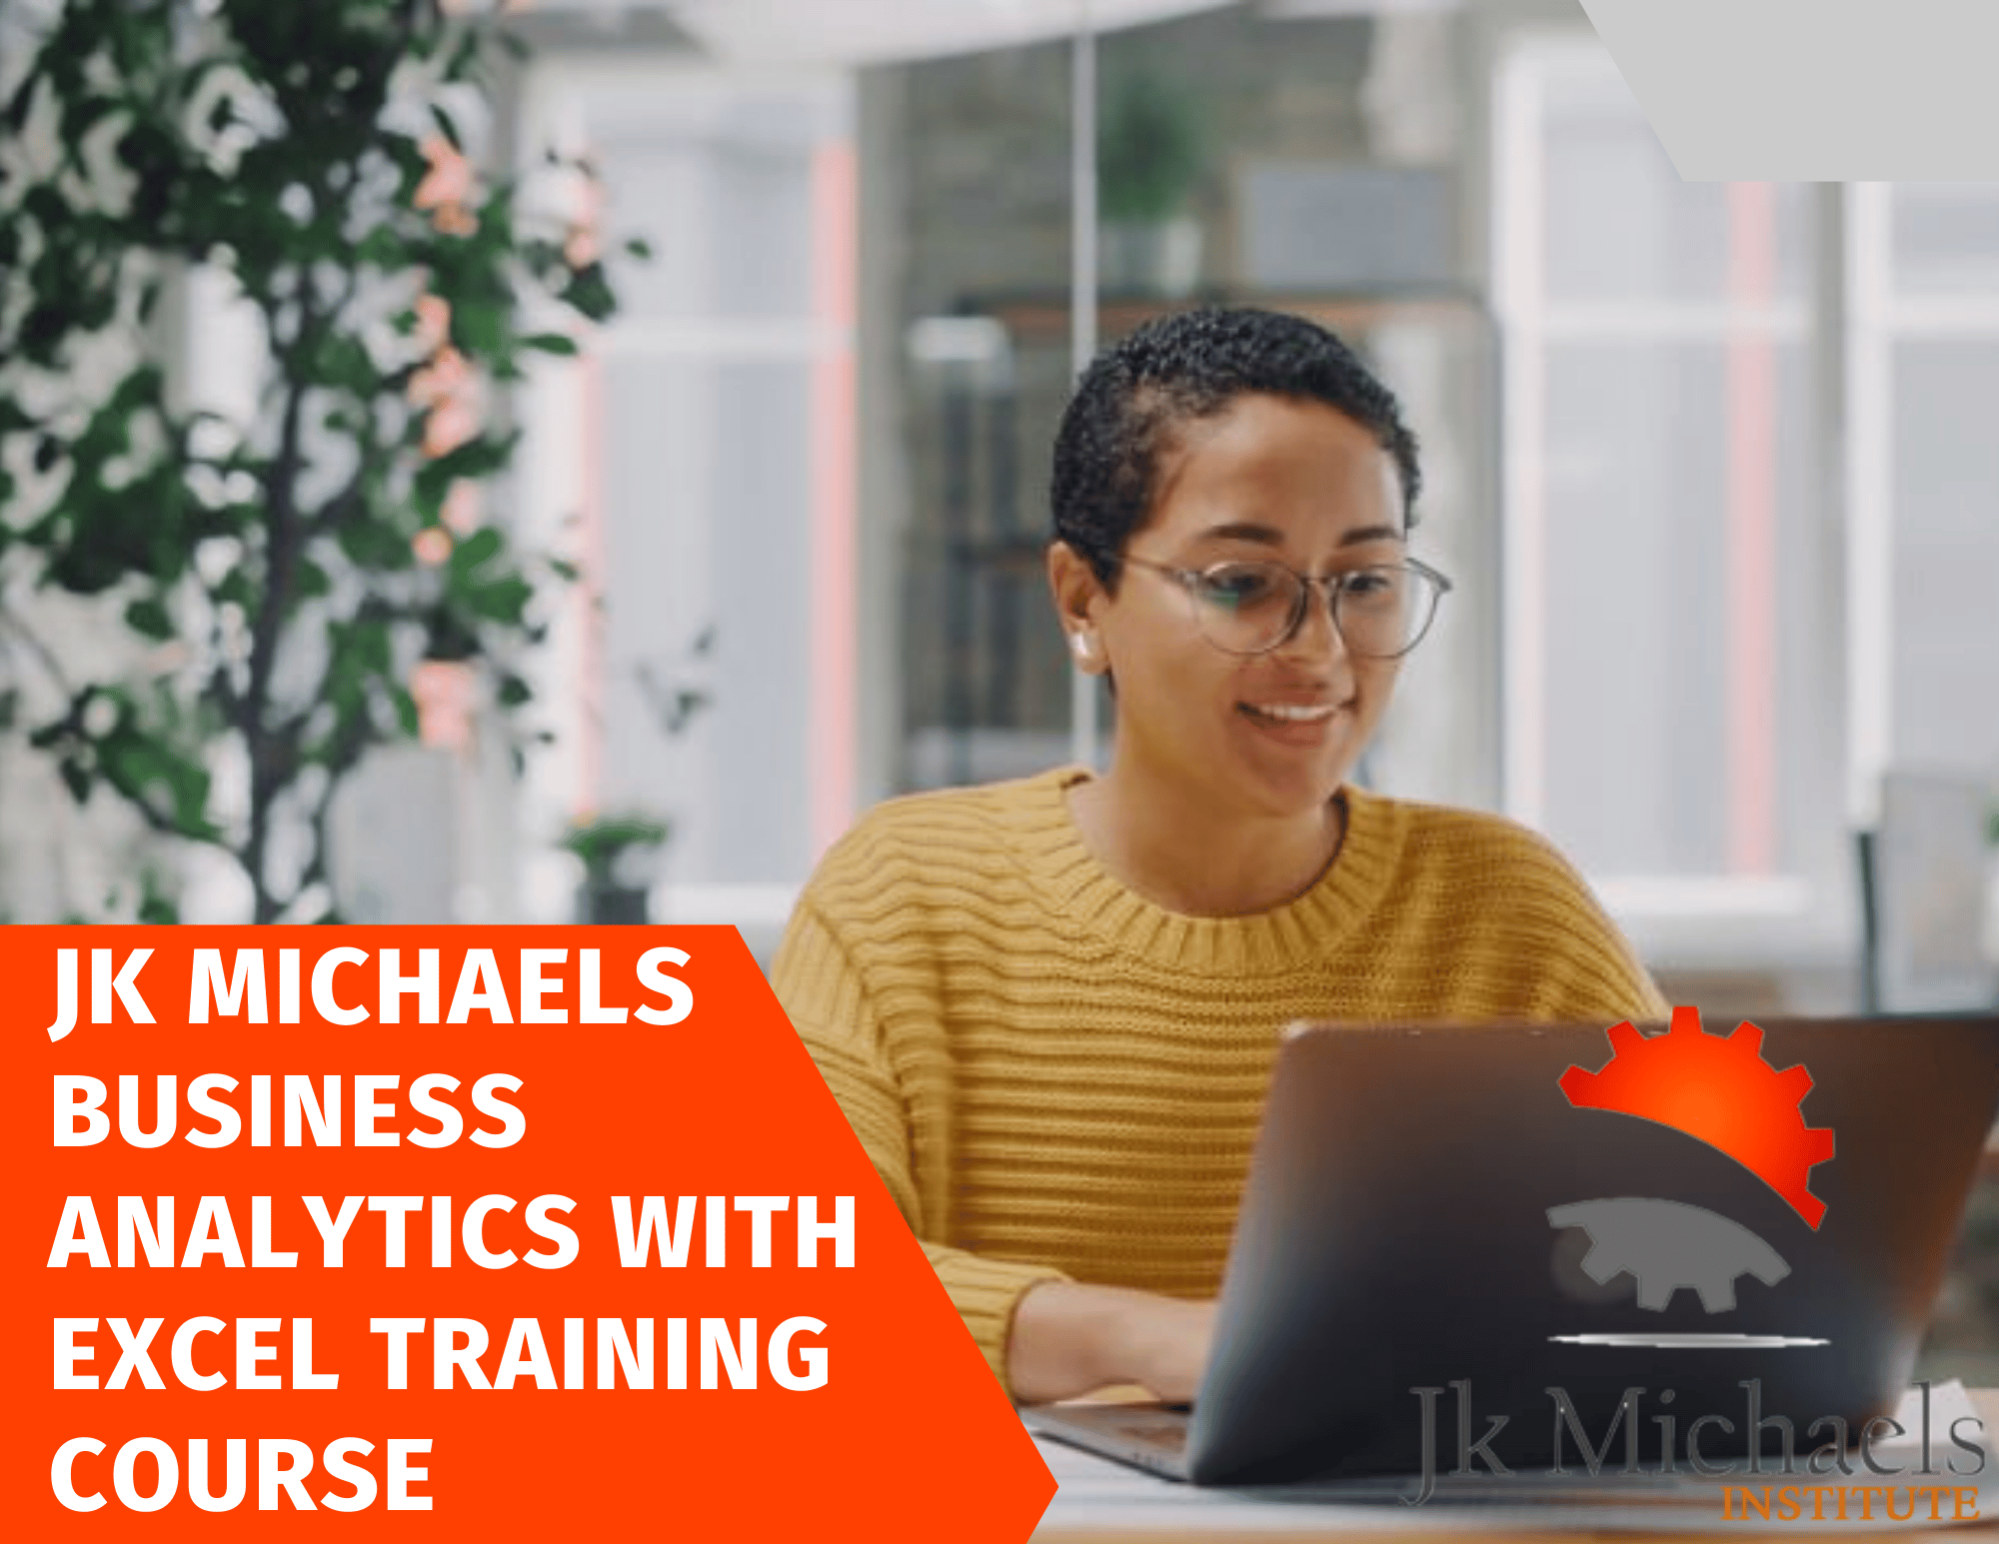 BUSINESS-ANALYTICS-WITH-EXCEL-TRAINING-COURSE-1999×1544